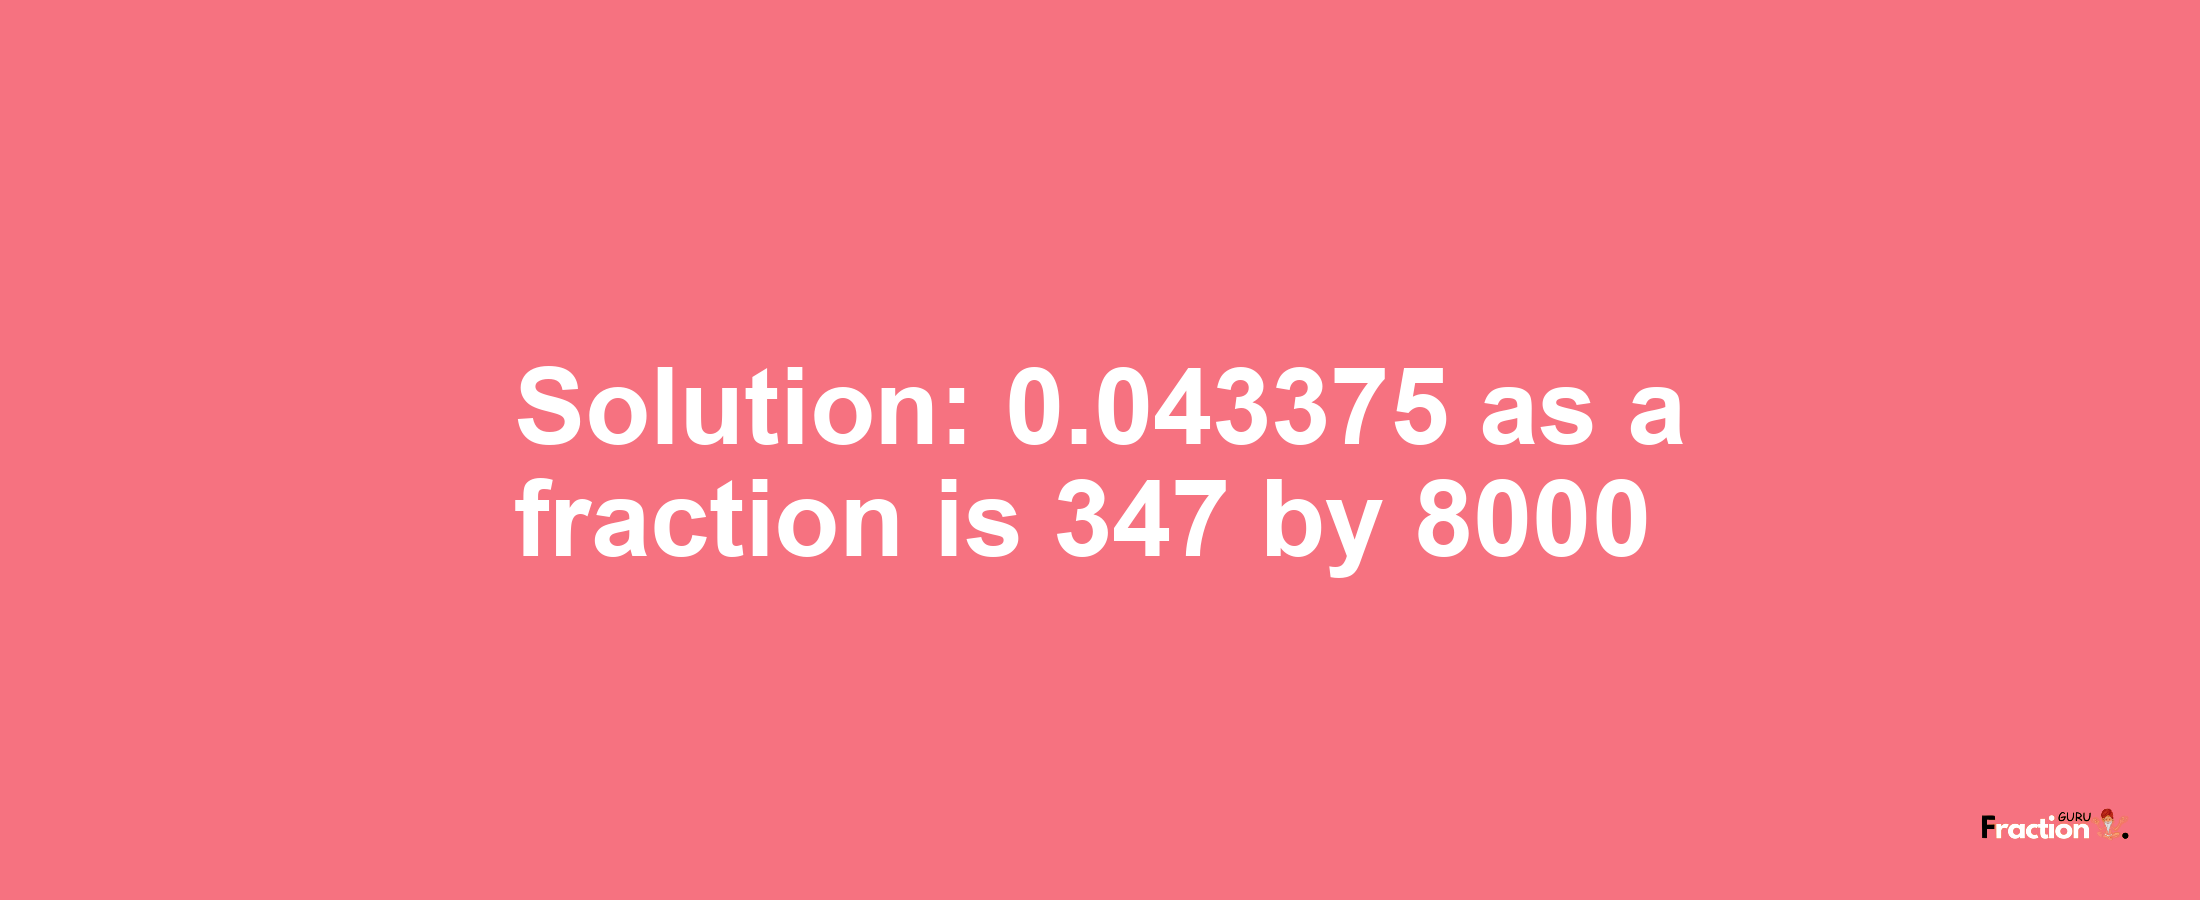 Solution:0.043375 as a fraction is 347/8000